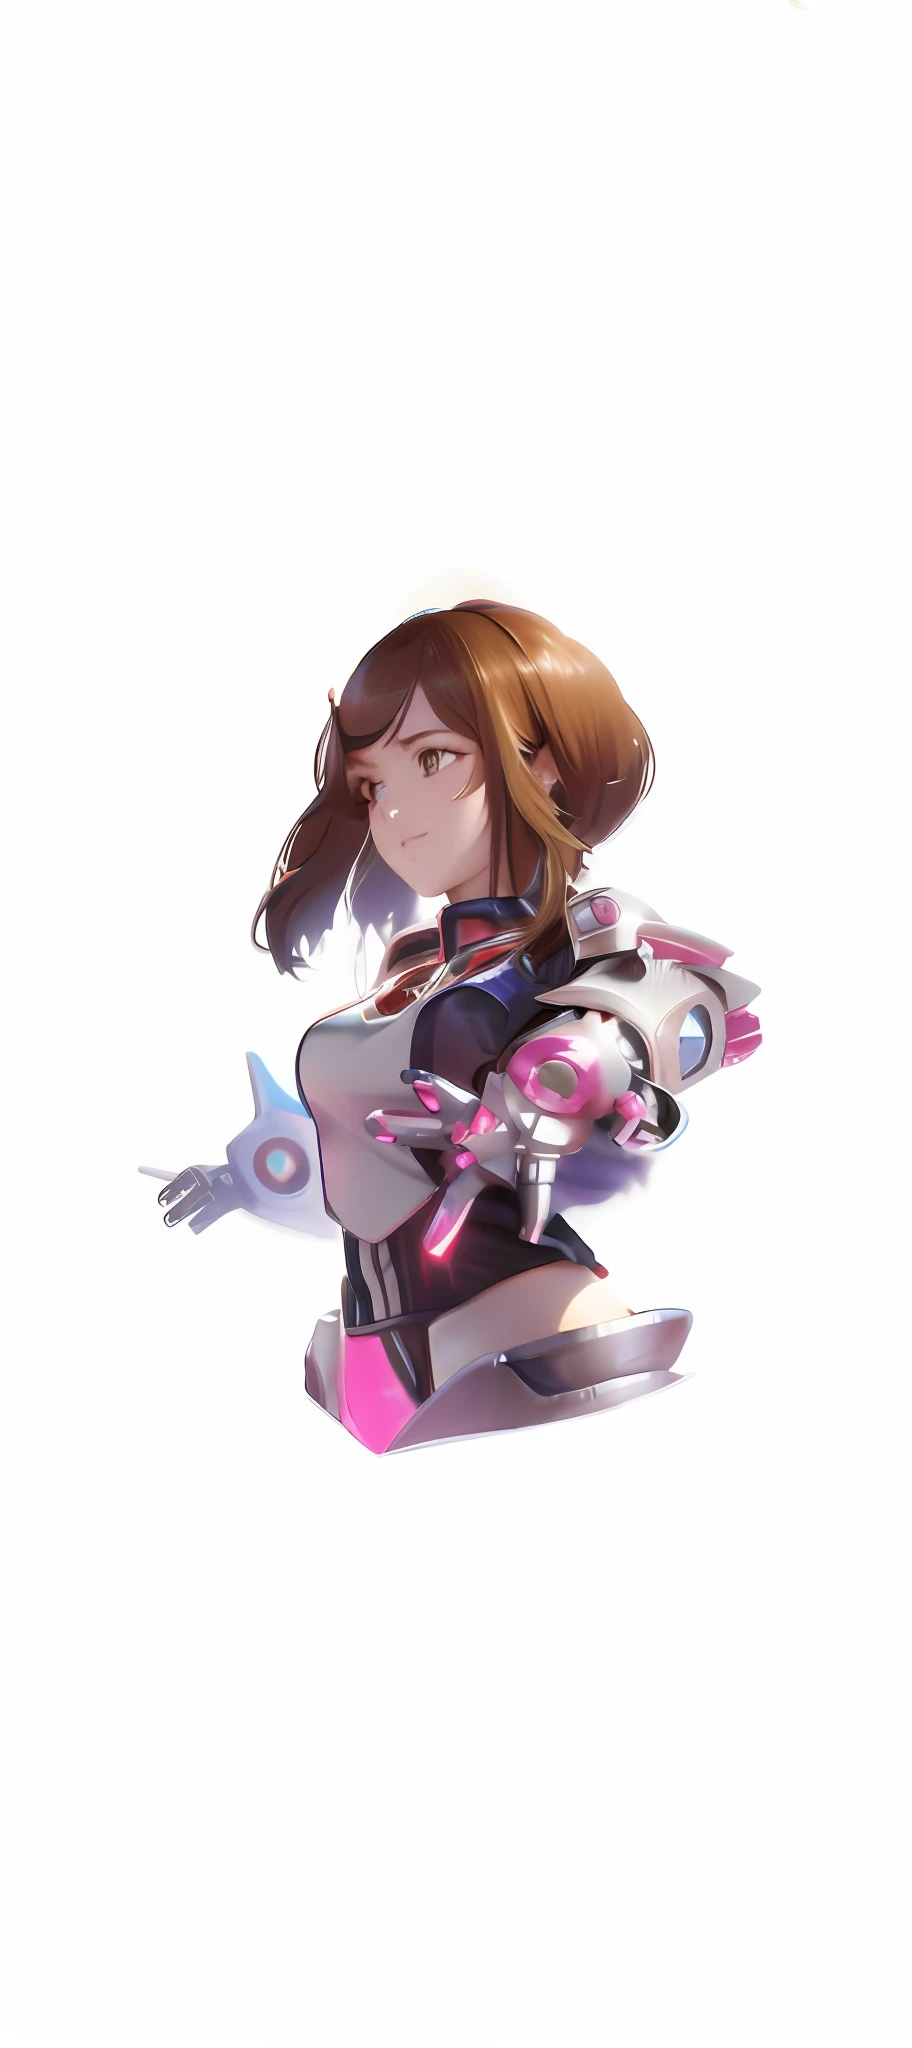 anime chica kneeling down with her arms outstretched and her legs crossed, cute cyborg chica, nanochica, Totalmente robótico!! chica, cyborg - chica, d. va de supervisión, oppai biomecánicos, heroína androide, perfect ciborg animado woman, ciborg animado, chica in mecha cyber armor, nanochicav 2, cyborg chica